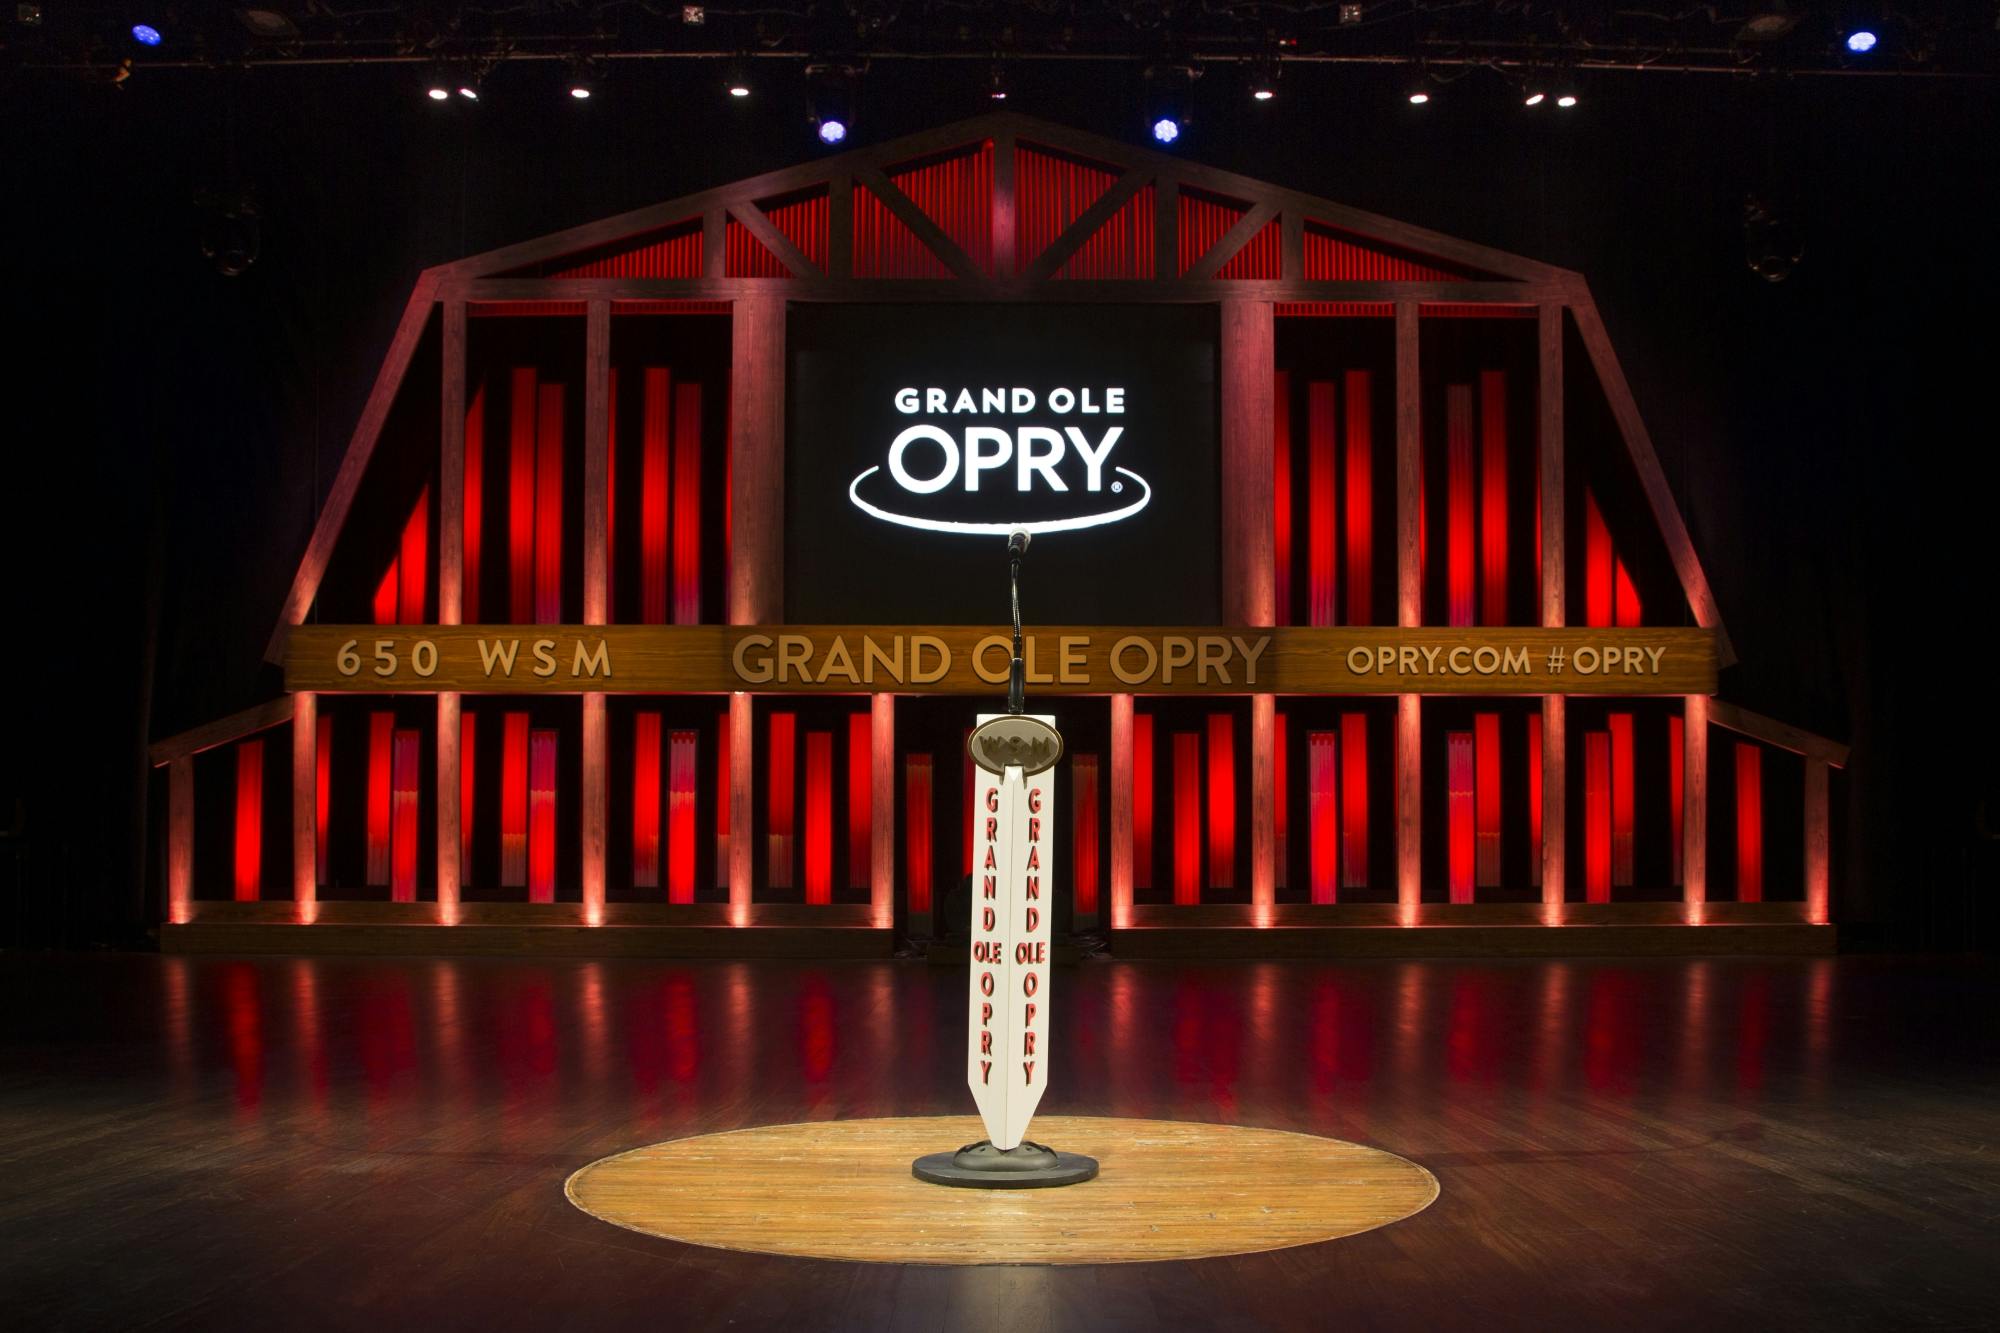 Grand Ole Opry Show ticket in Nashville